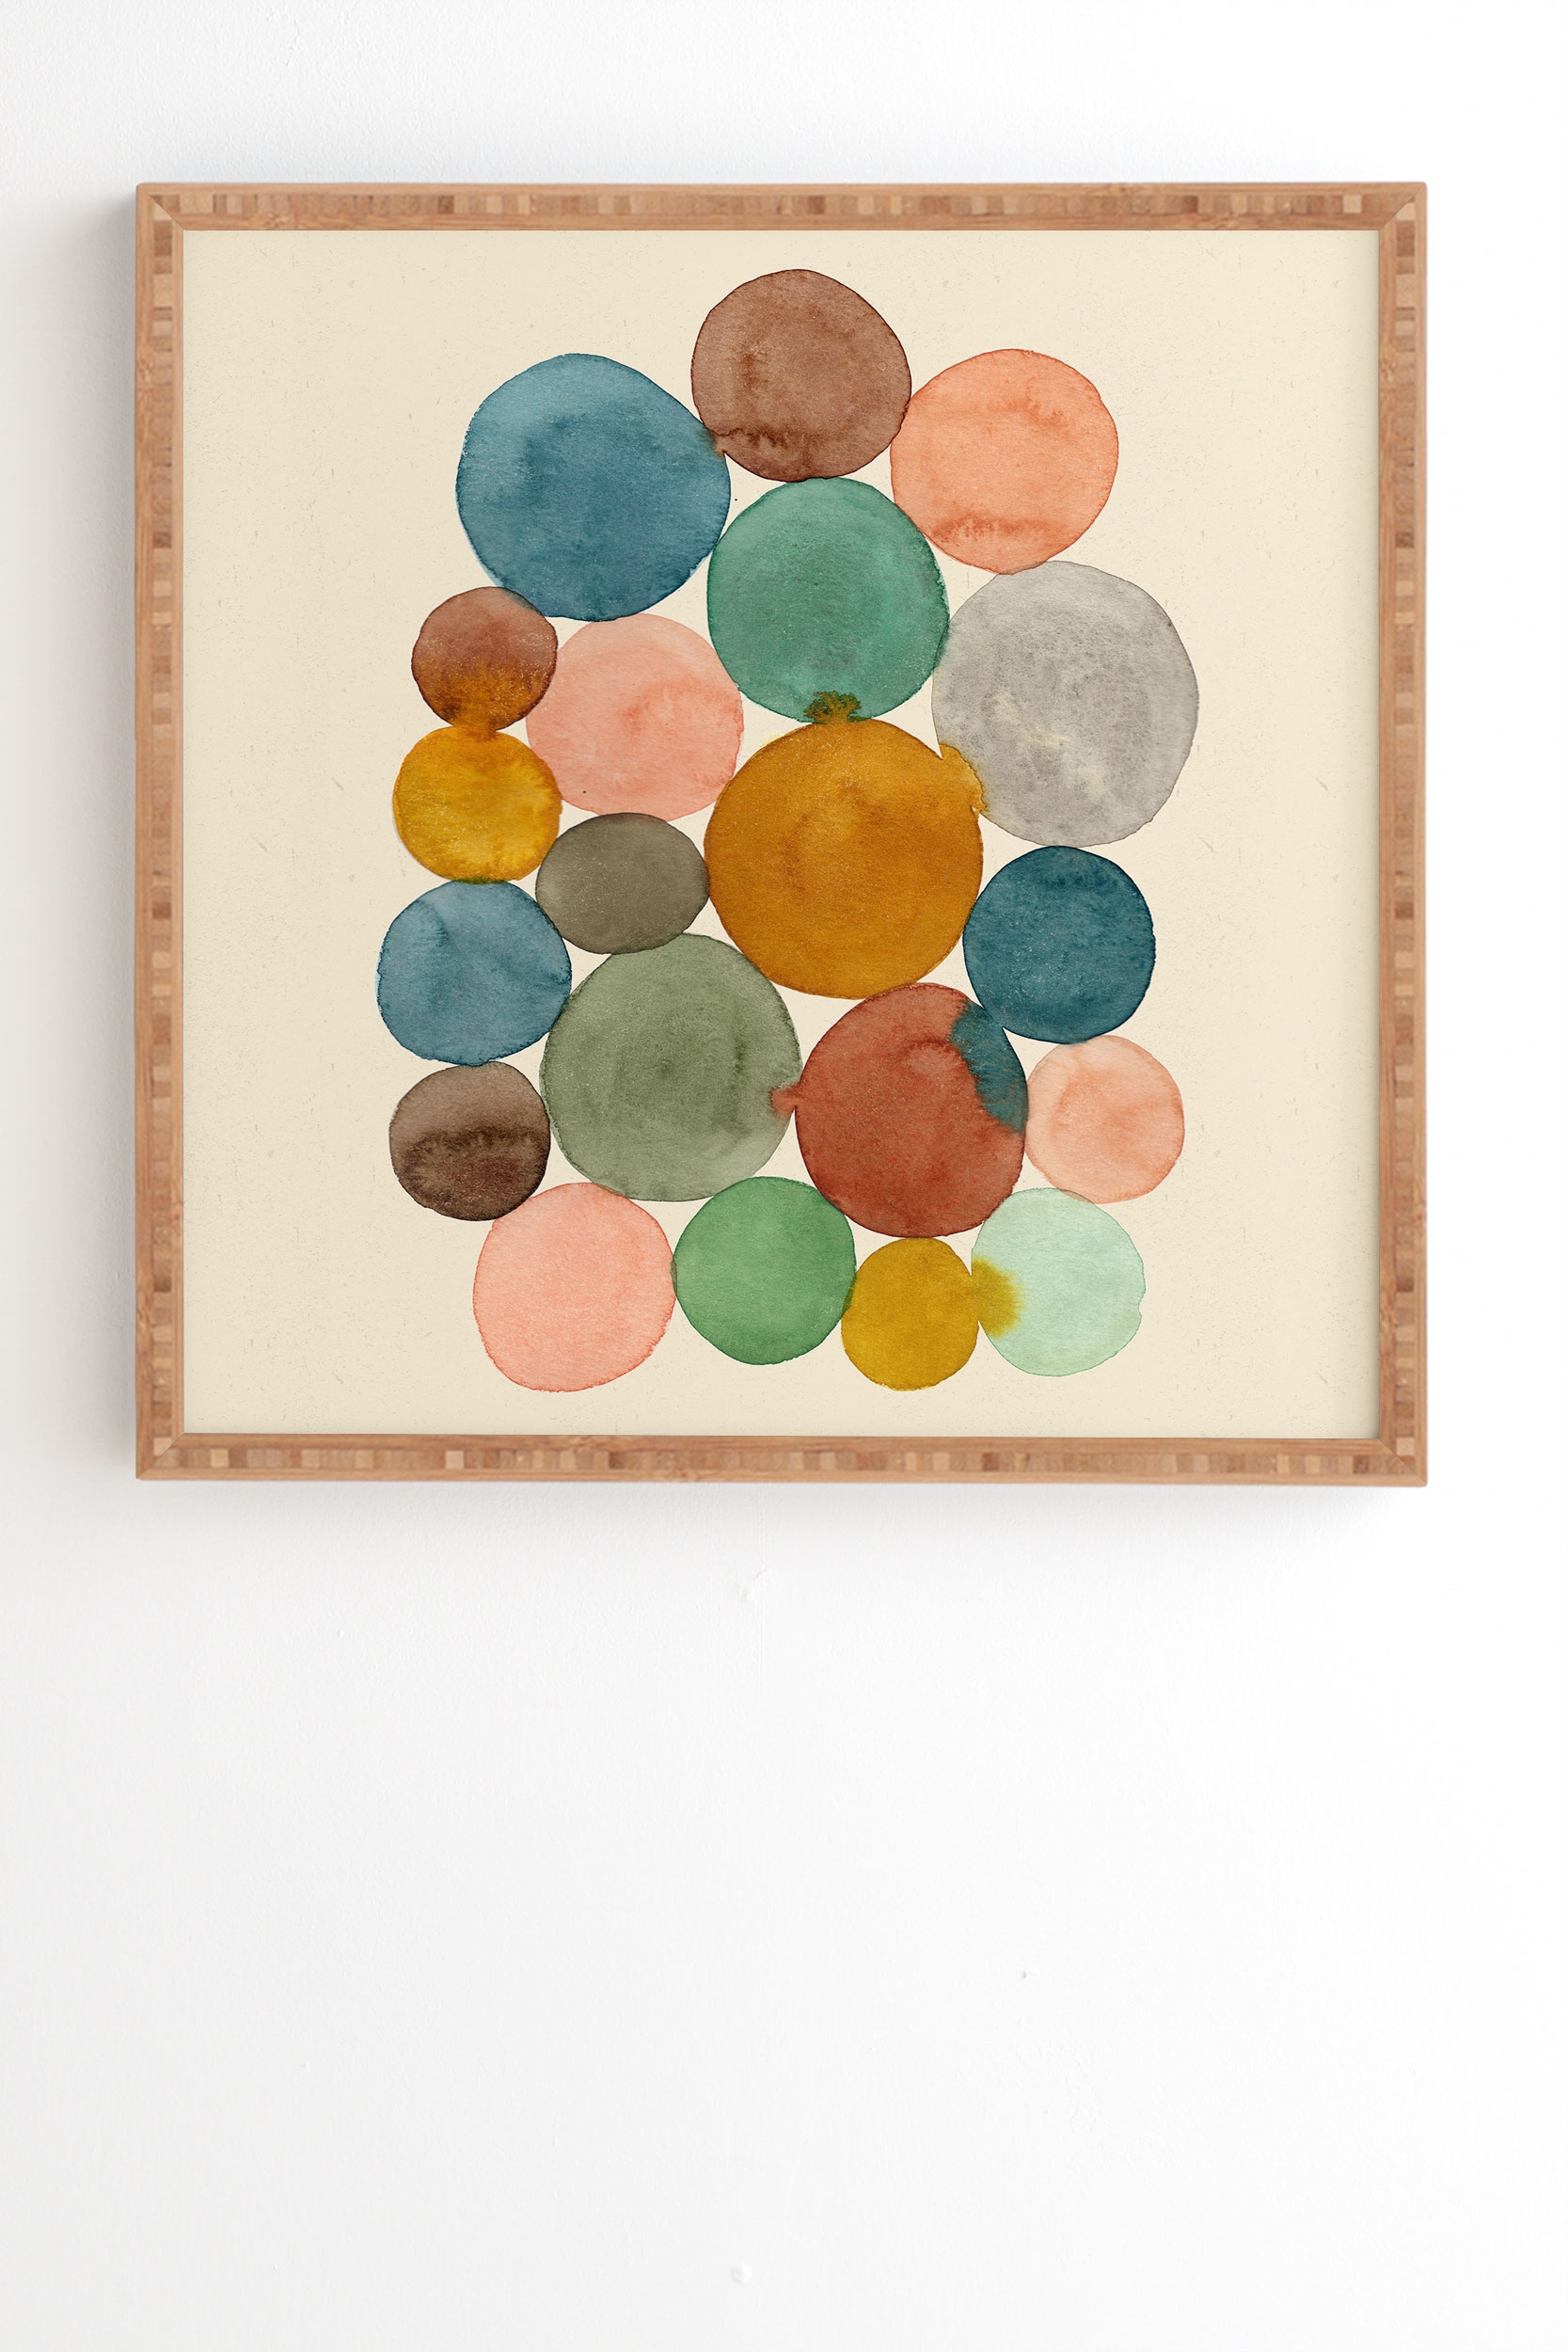 Connected Dots by Pauline Stanley - Framed Wall Art Bamboo 14" x 16.5" - Image 1